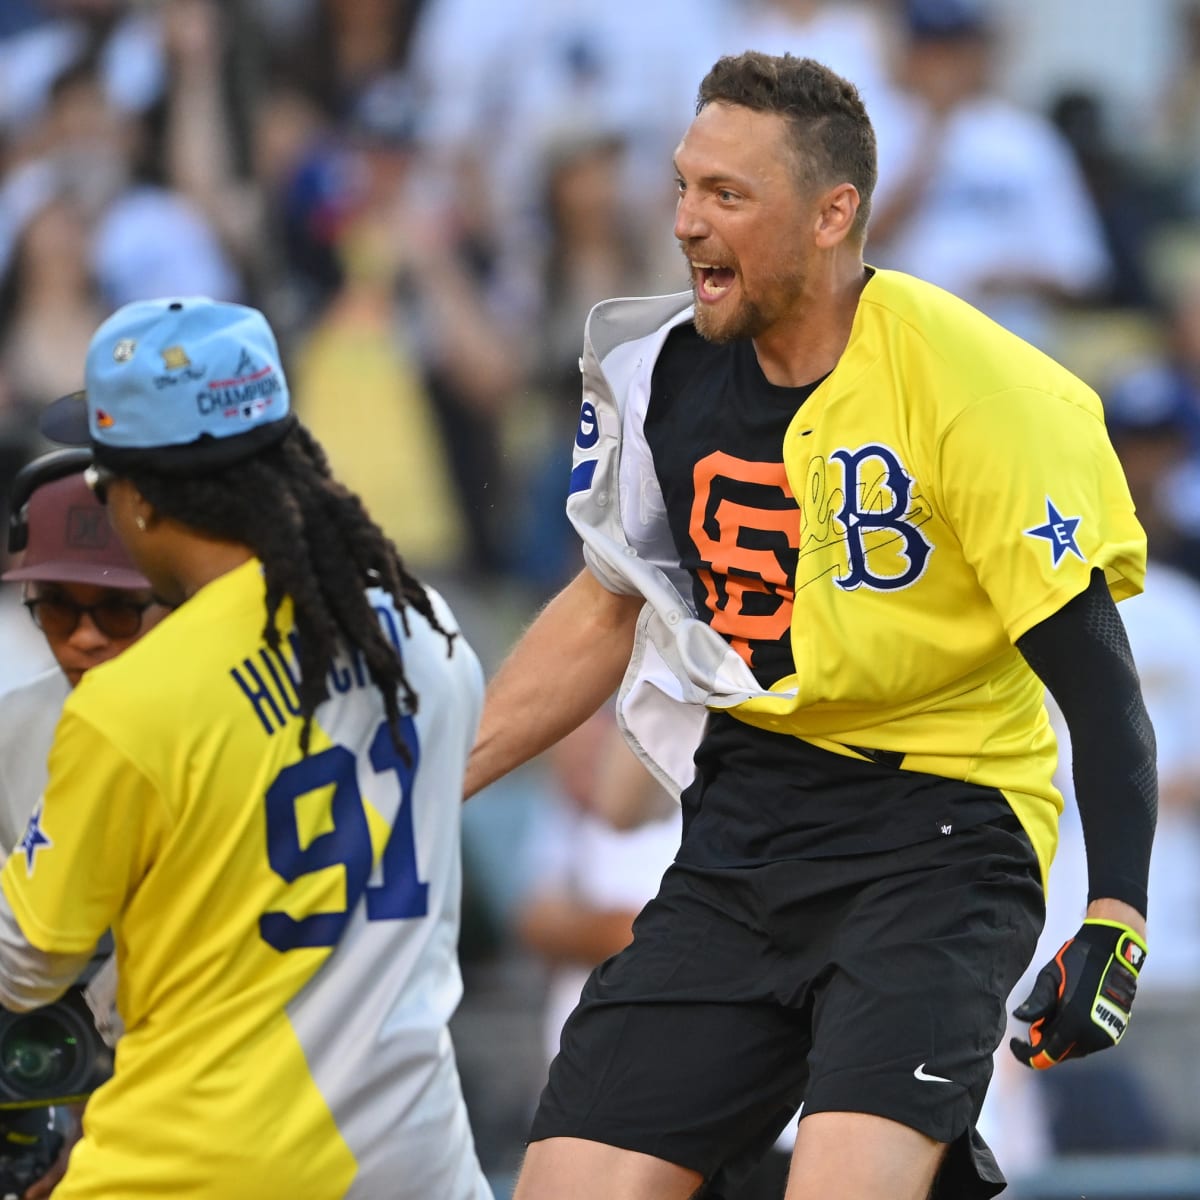 MLB All-Star celebrity softball game 2022: Roster includes Bad